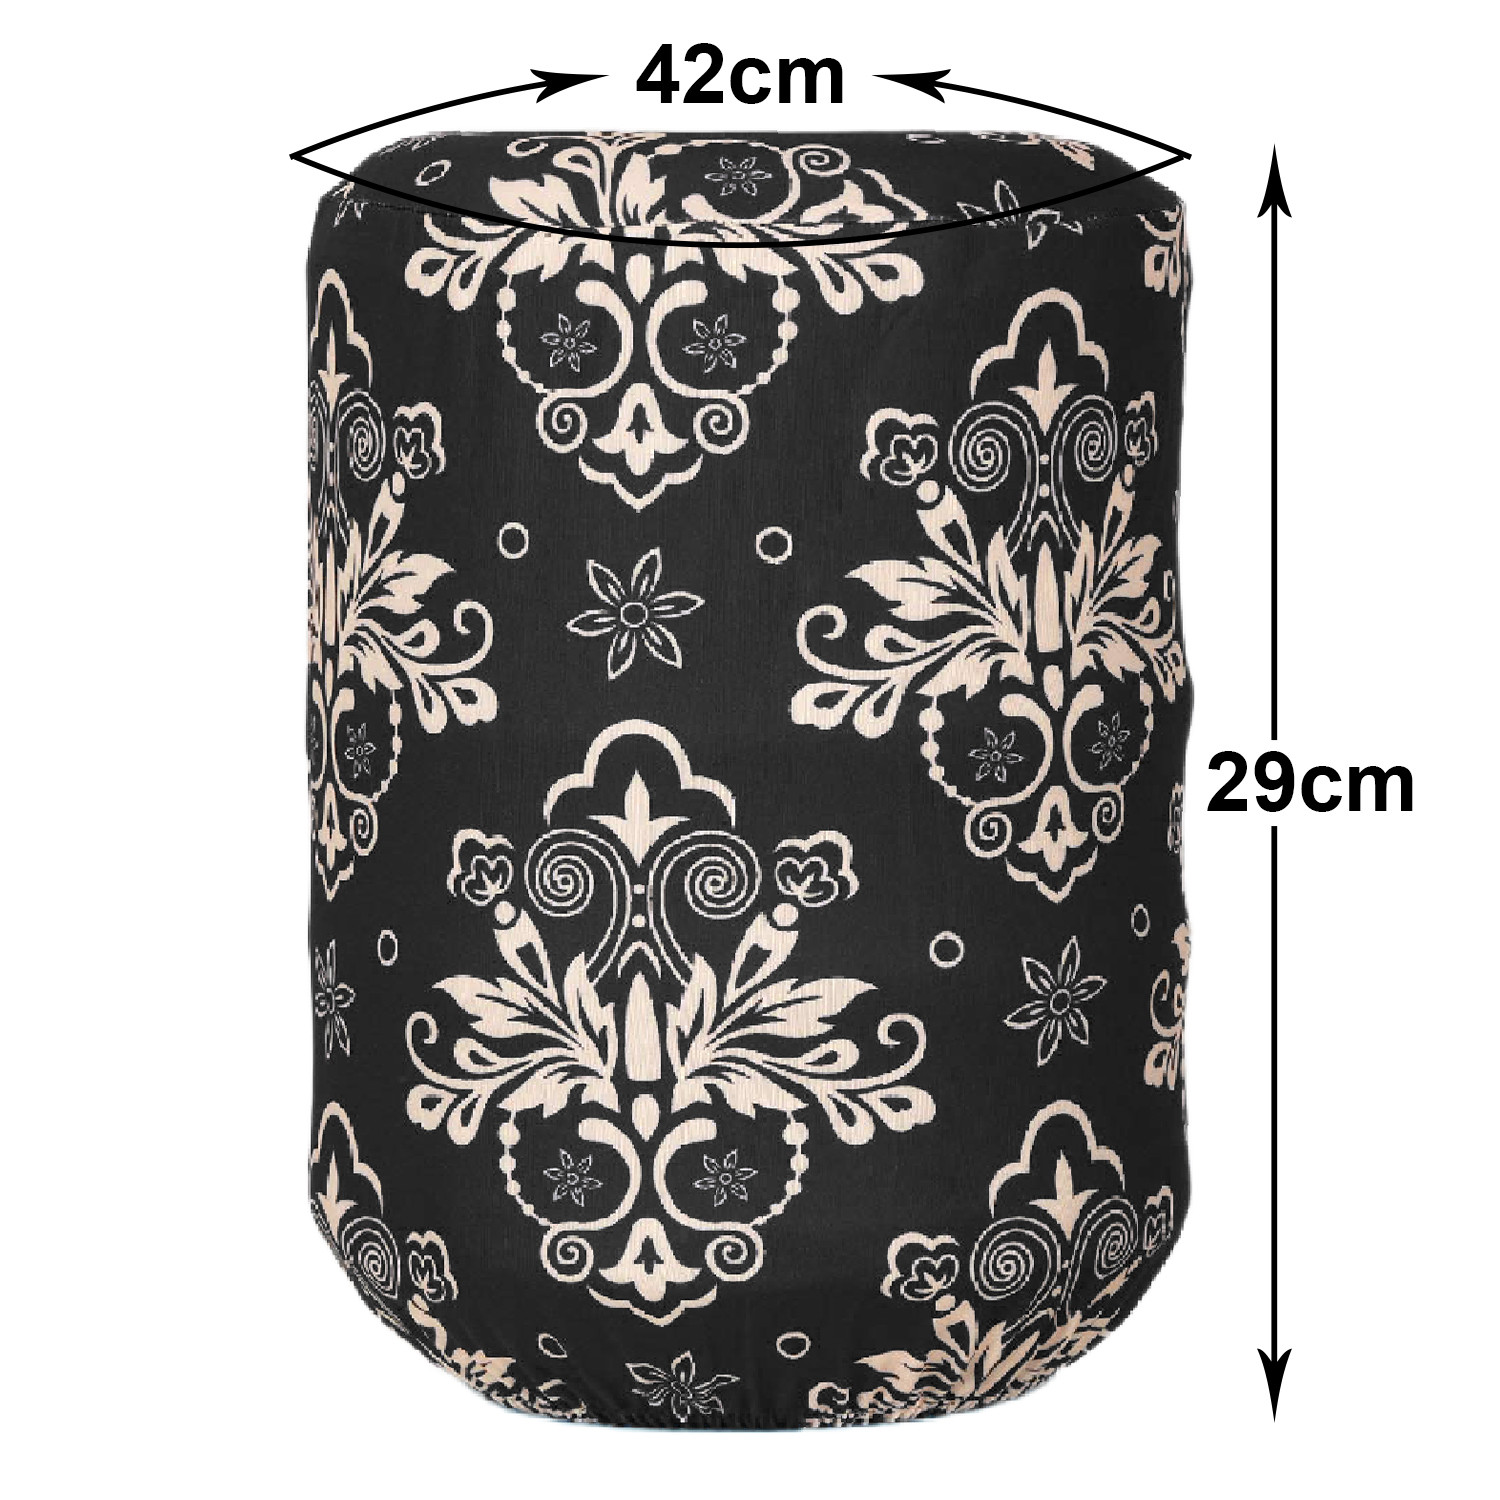 Kuber Industries Water Dispenser Bottle Cover|Damask Print & Stretchy Polyester Fabric|Bottle Protector with Elastic Closure,20Ltr, (Black)